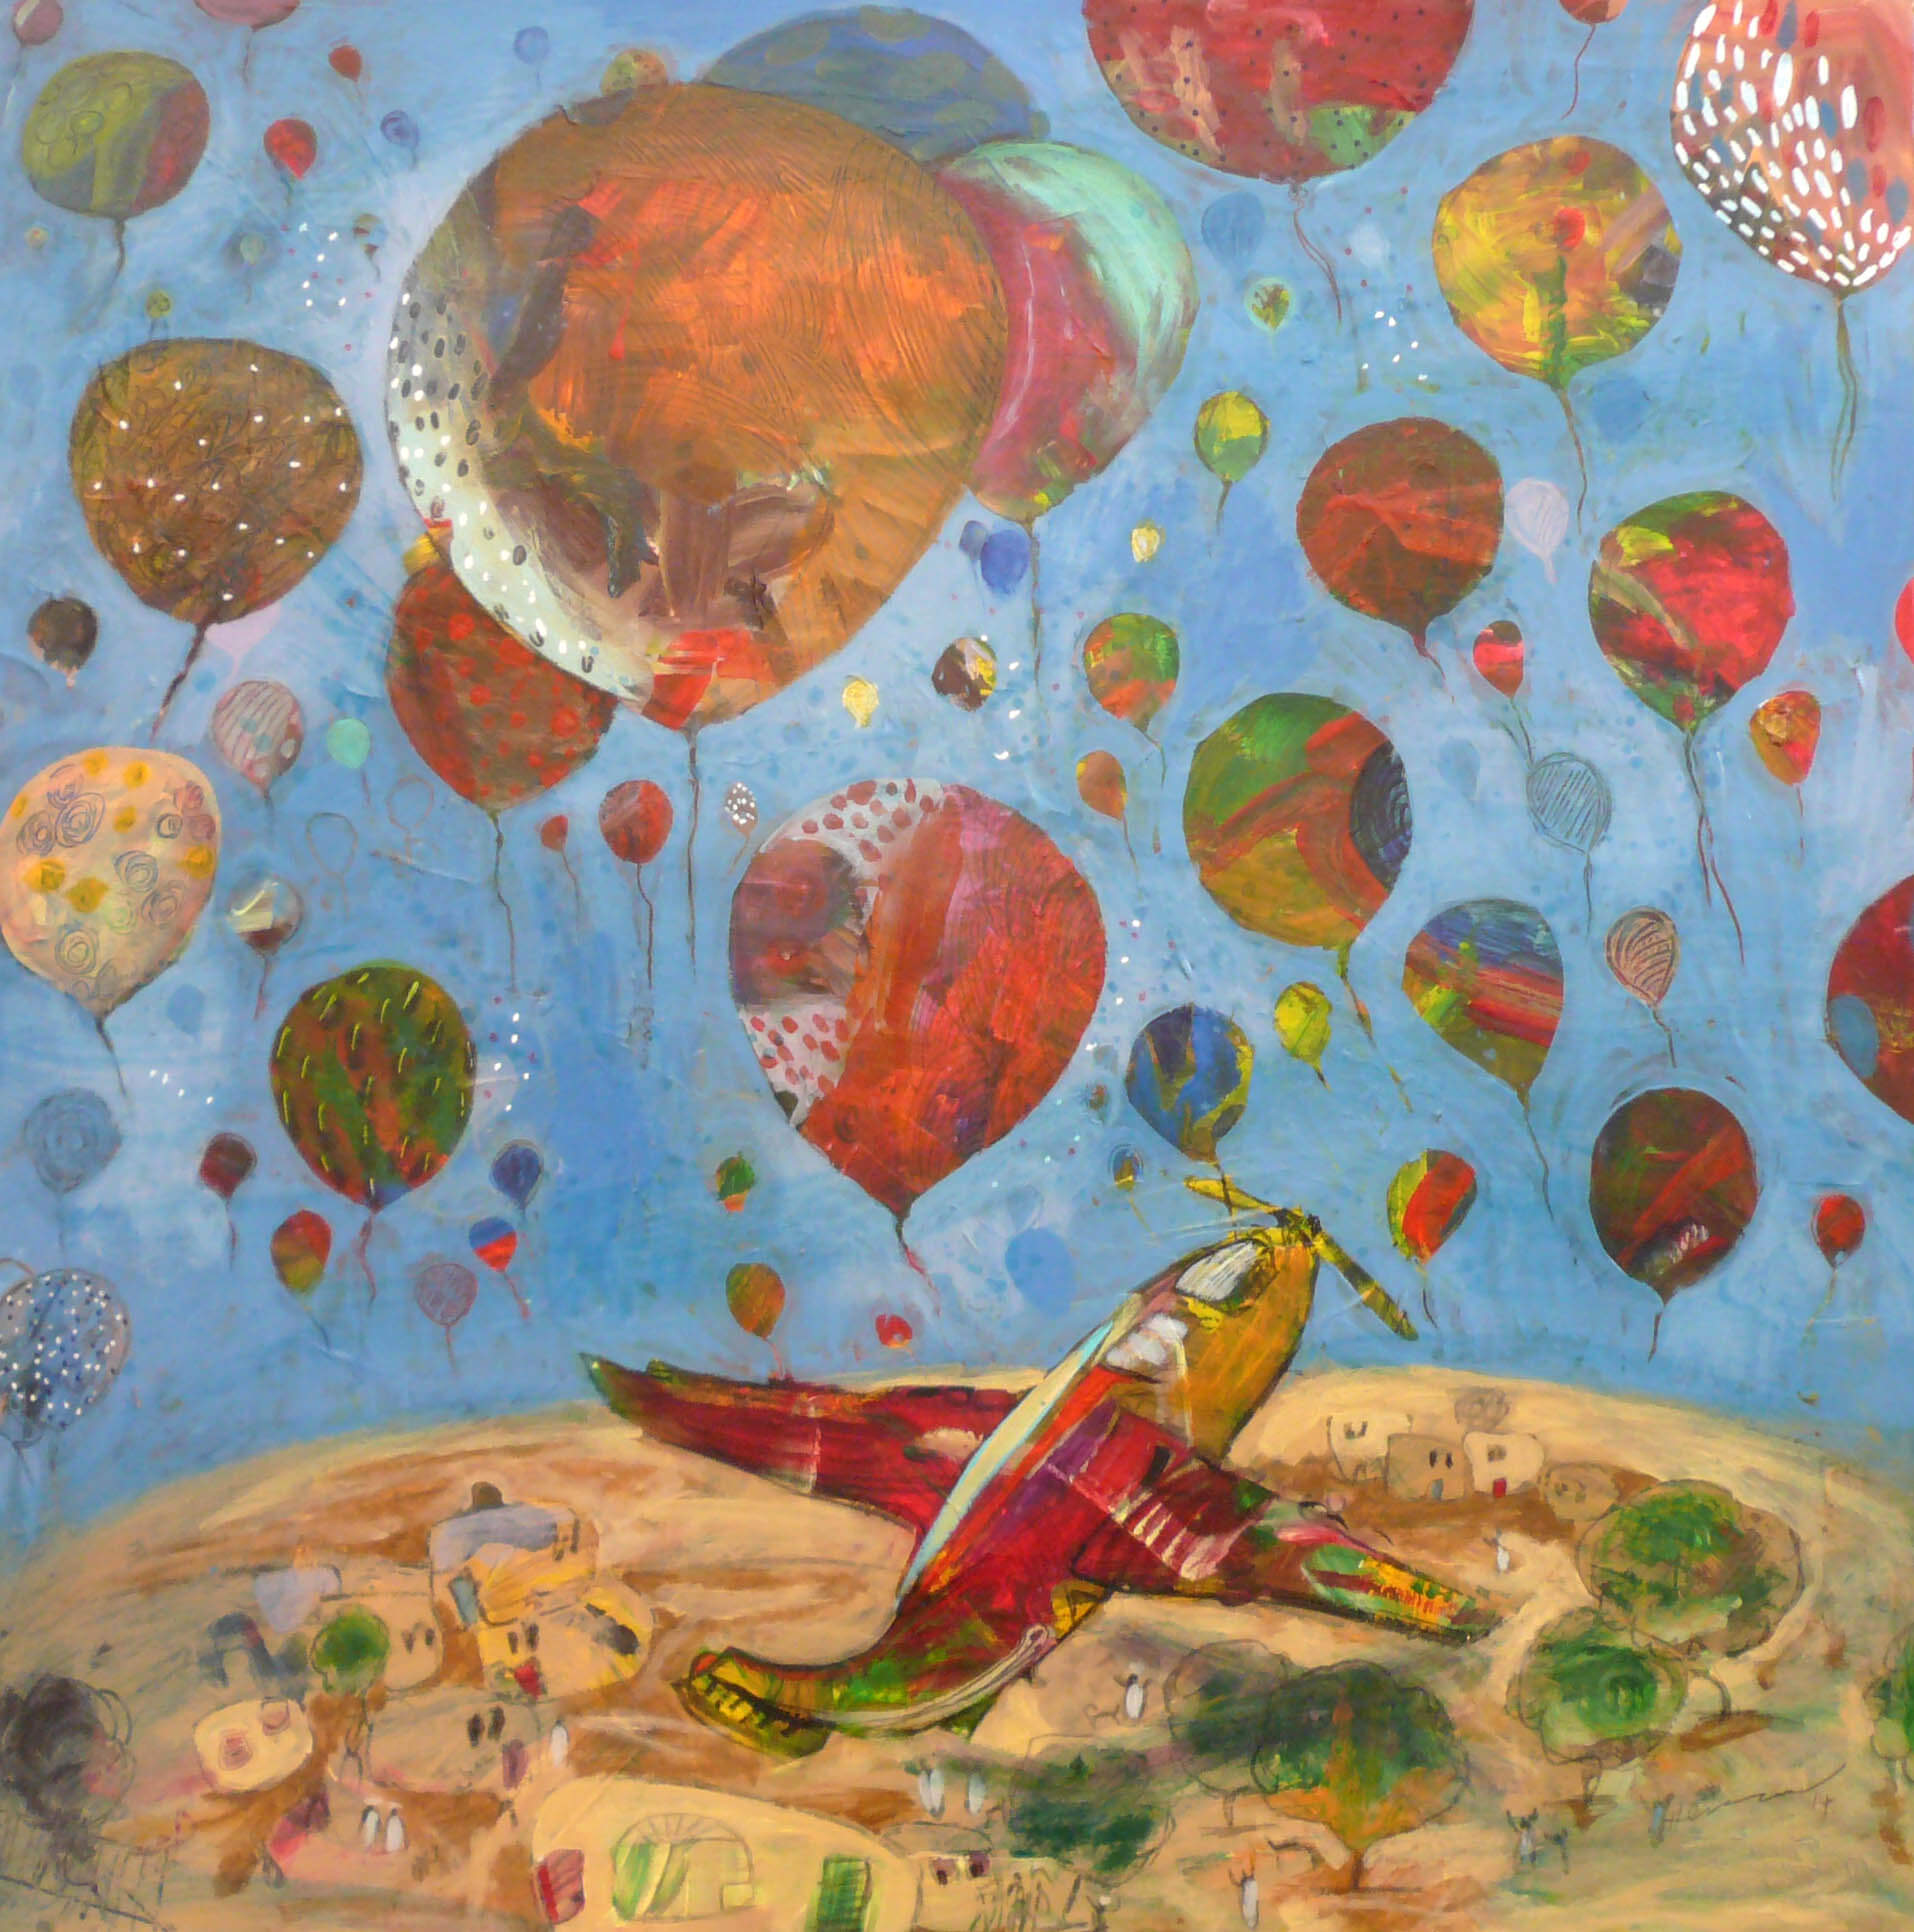 Balloons To Freedom by Hussein Salim